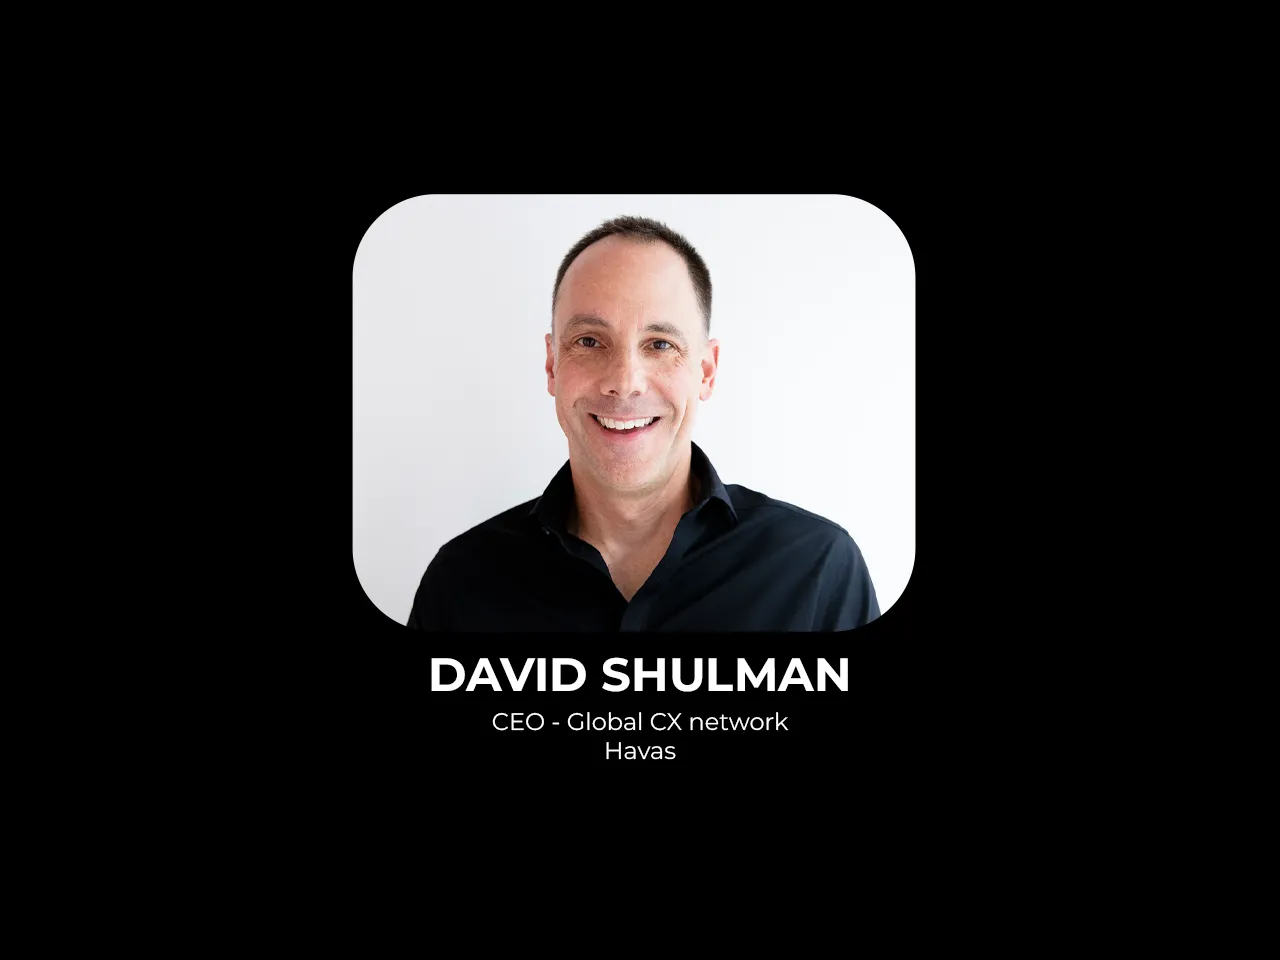 Havas appoints David Shulman as CEO of its global CX network